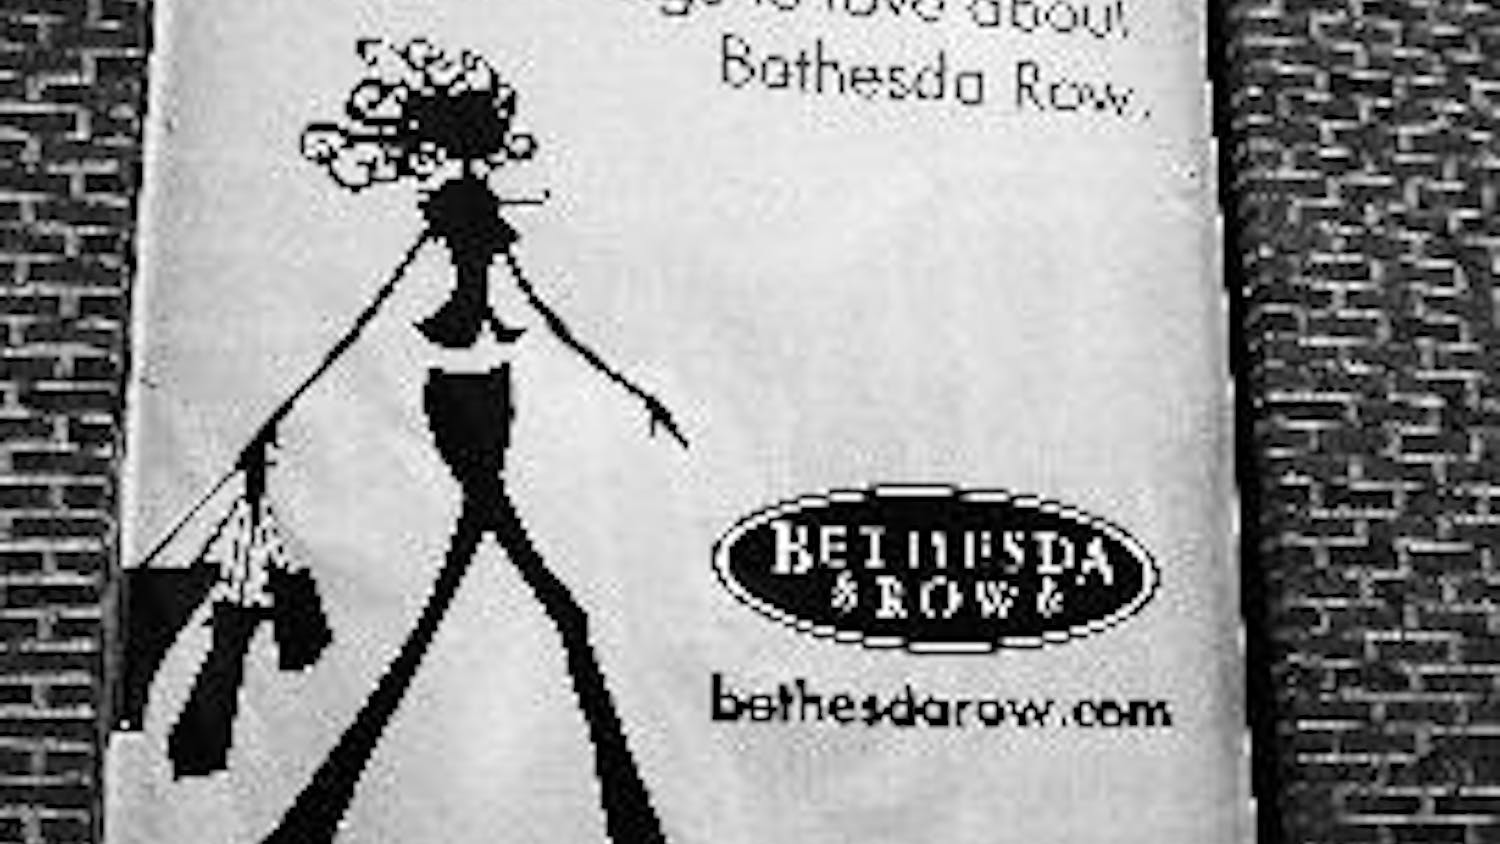 BETHESDA'S FINEST - Bethesda Lane at Bethesda Row provides a luxury, European-feeling shopping experience to the greater D.C. area. Gourmet eateries stocking hard to find treats and upscale boutiques line the streets of the new shopping destination. Rebec